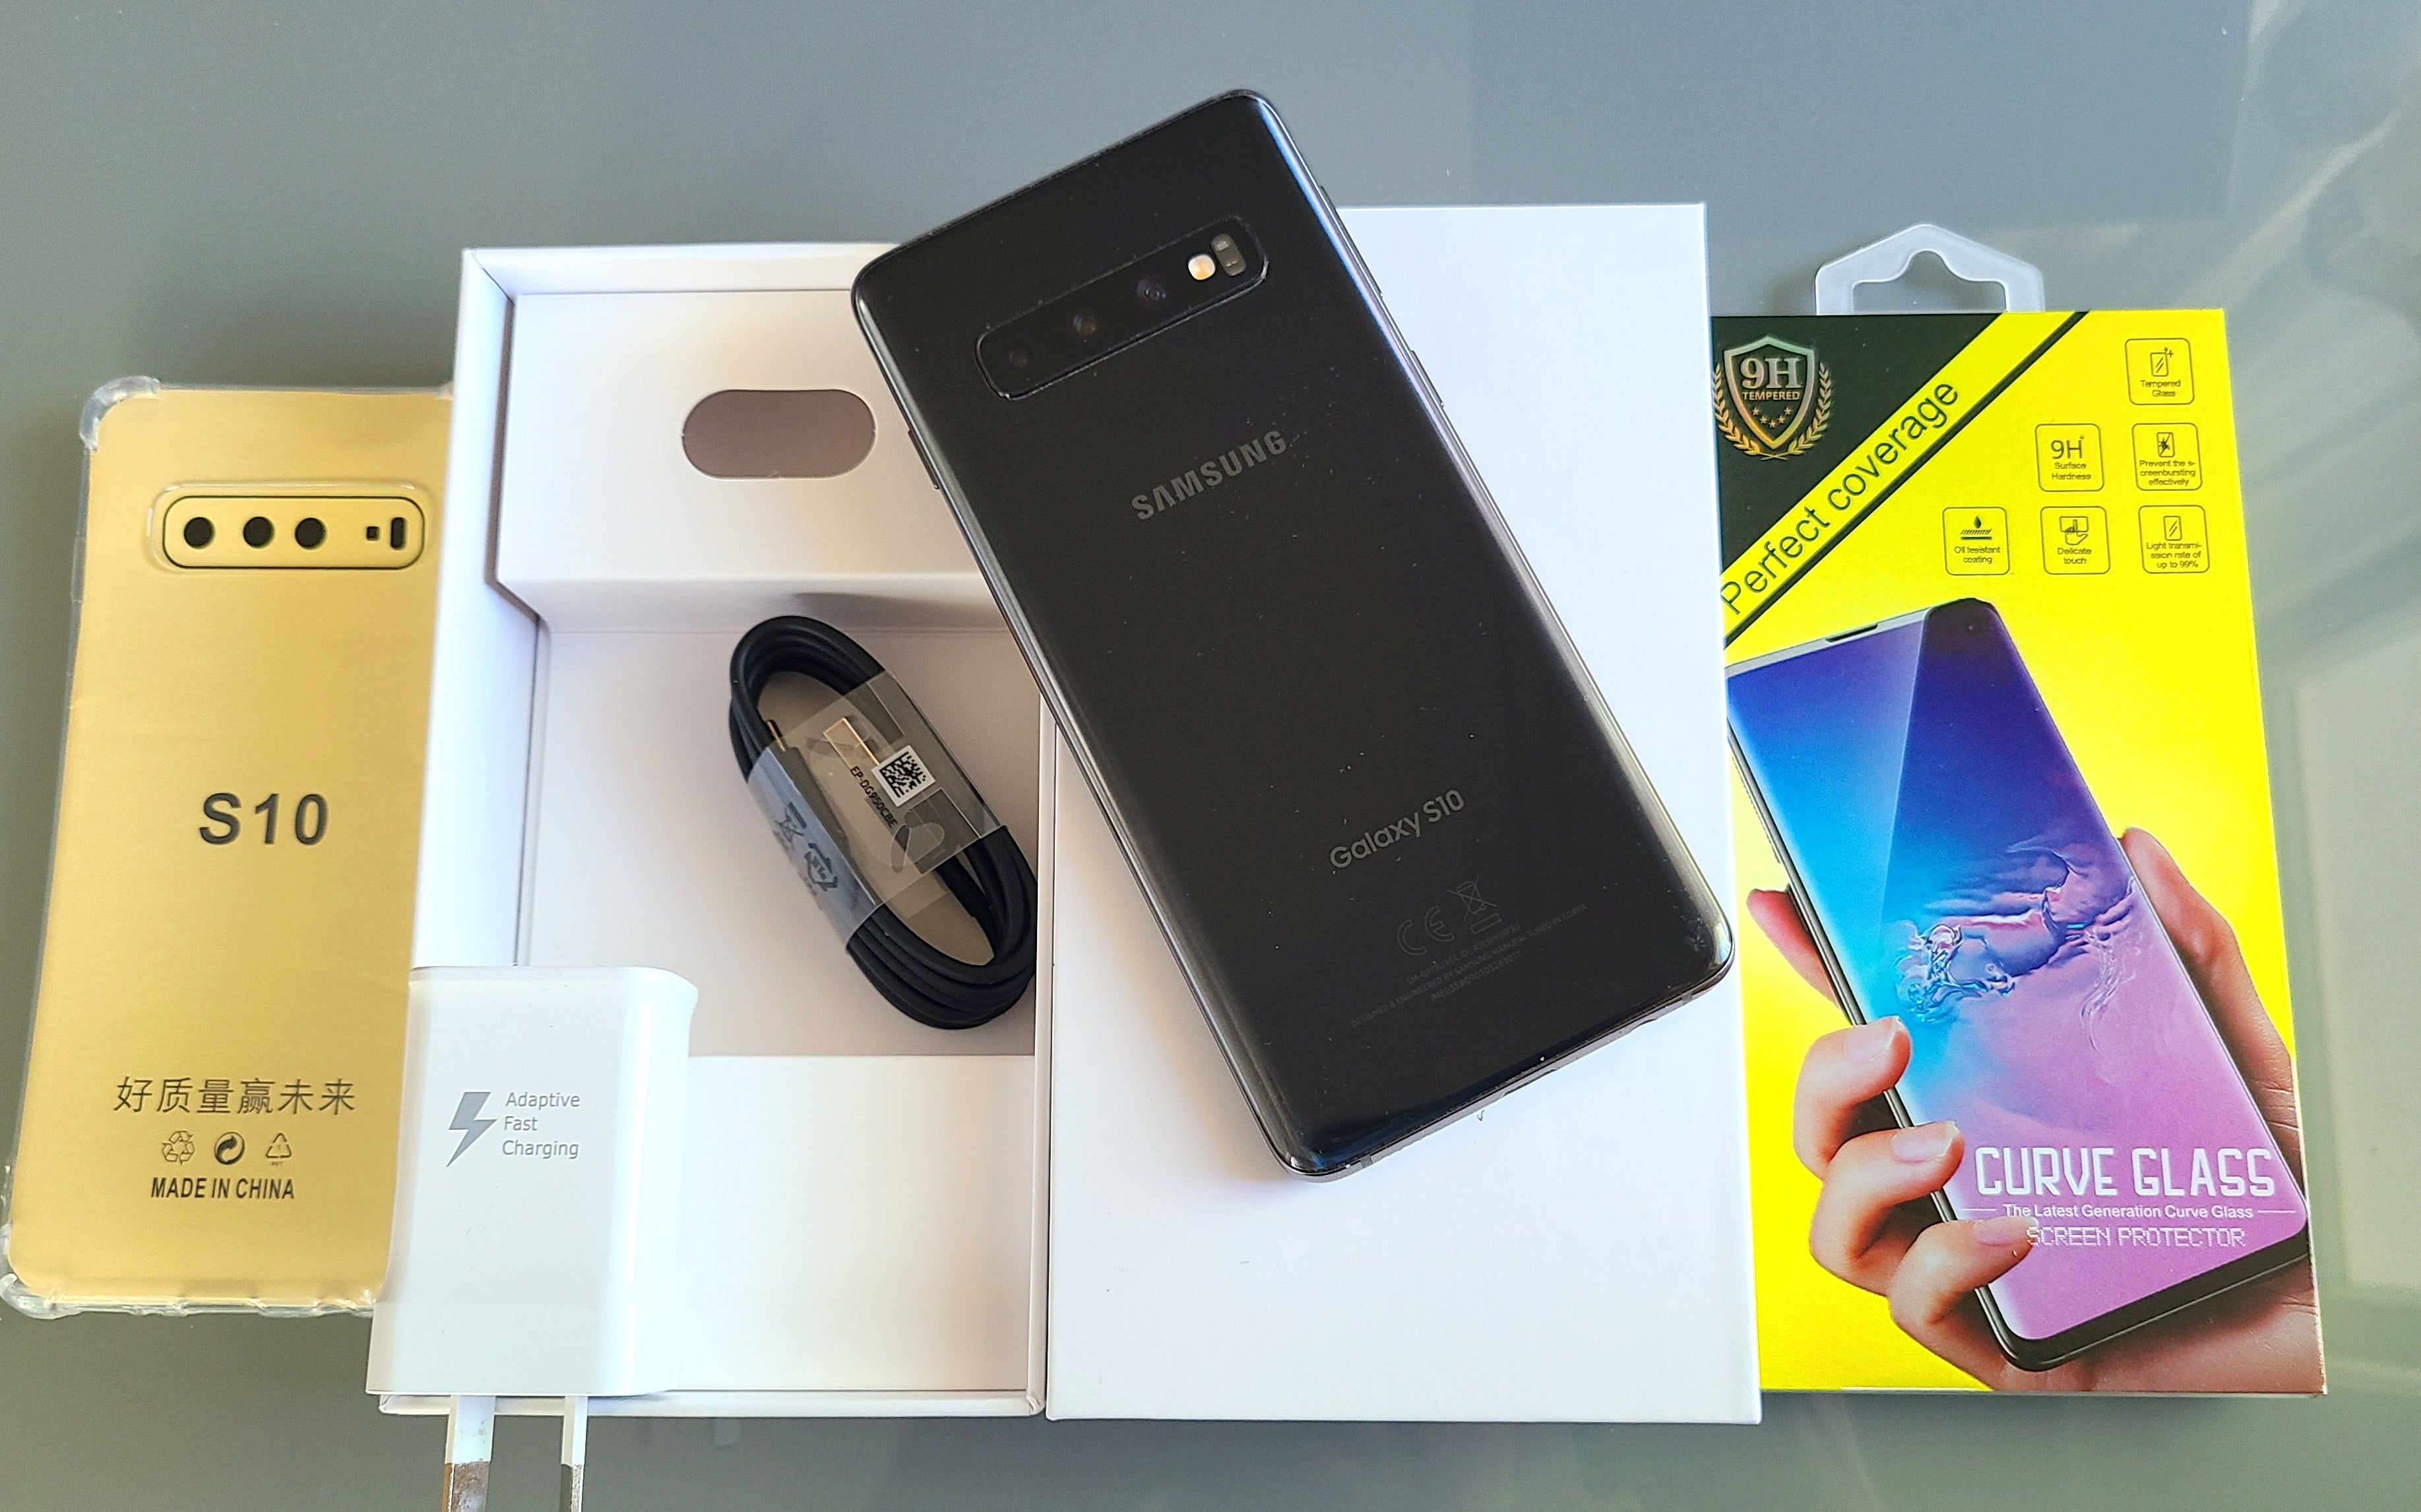 Samsung Galaxy S10 128GB 8GB Prism Black (Excellent) With Case, Glass Screen Protector & Shipping